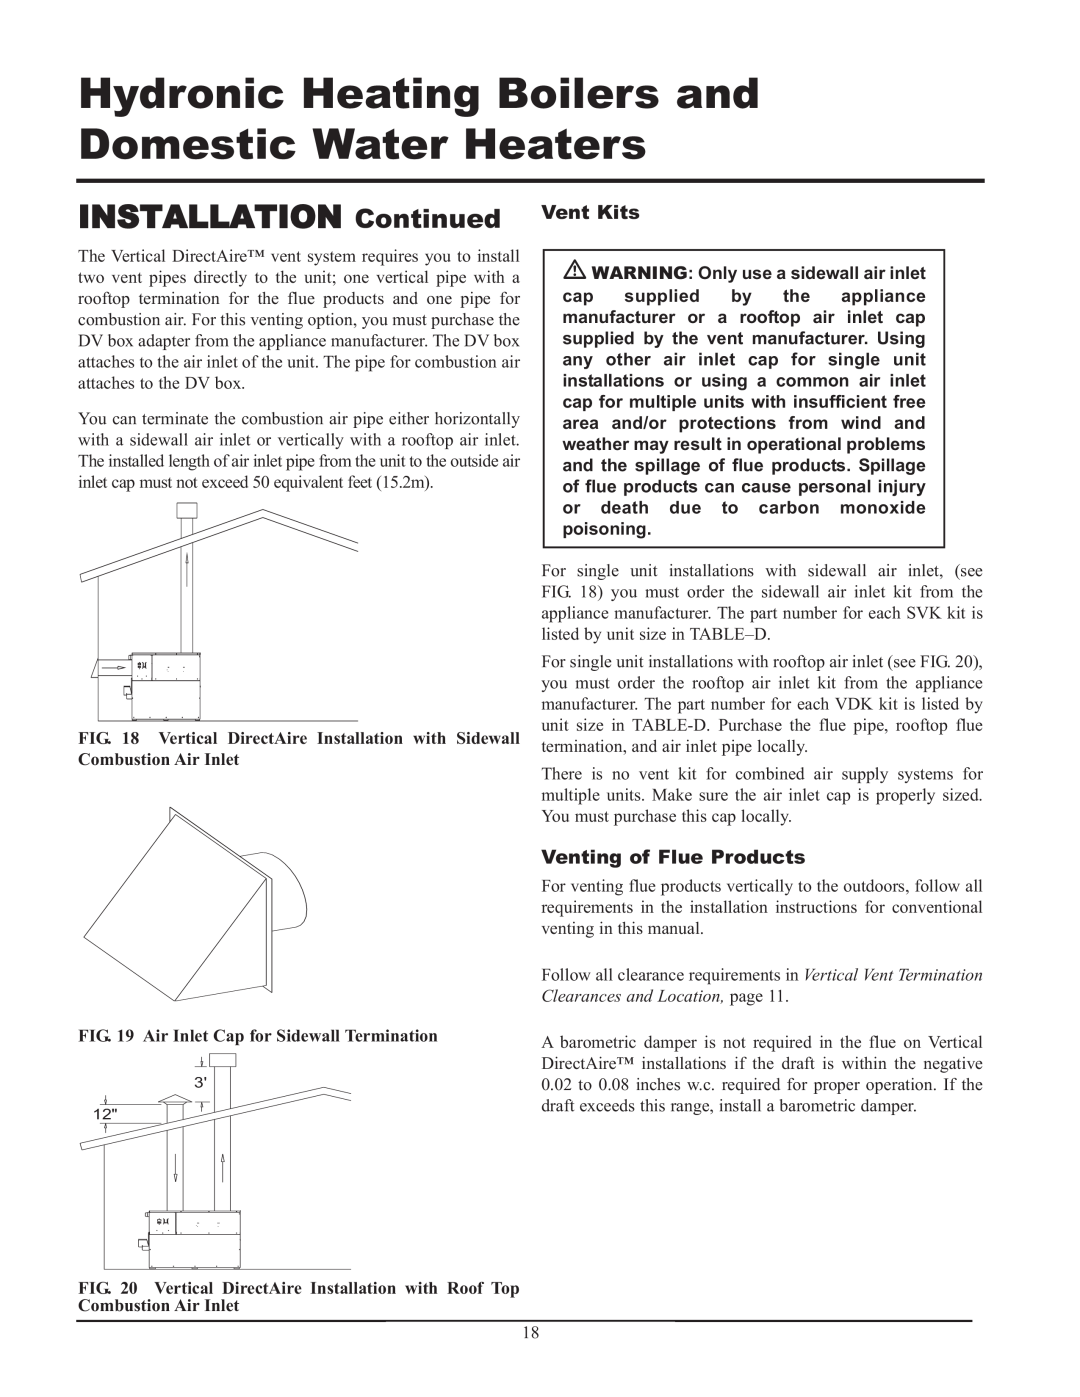 Lochinvar 999 - 750 INSTALLATION Continued Vent Kits, Venting of Flue Products, Air Inlet Cap for Sidewall Termination 